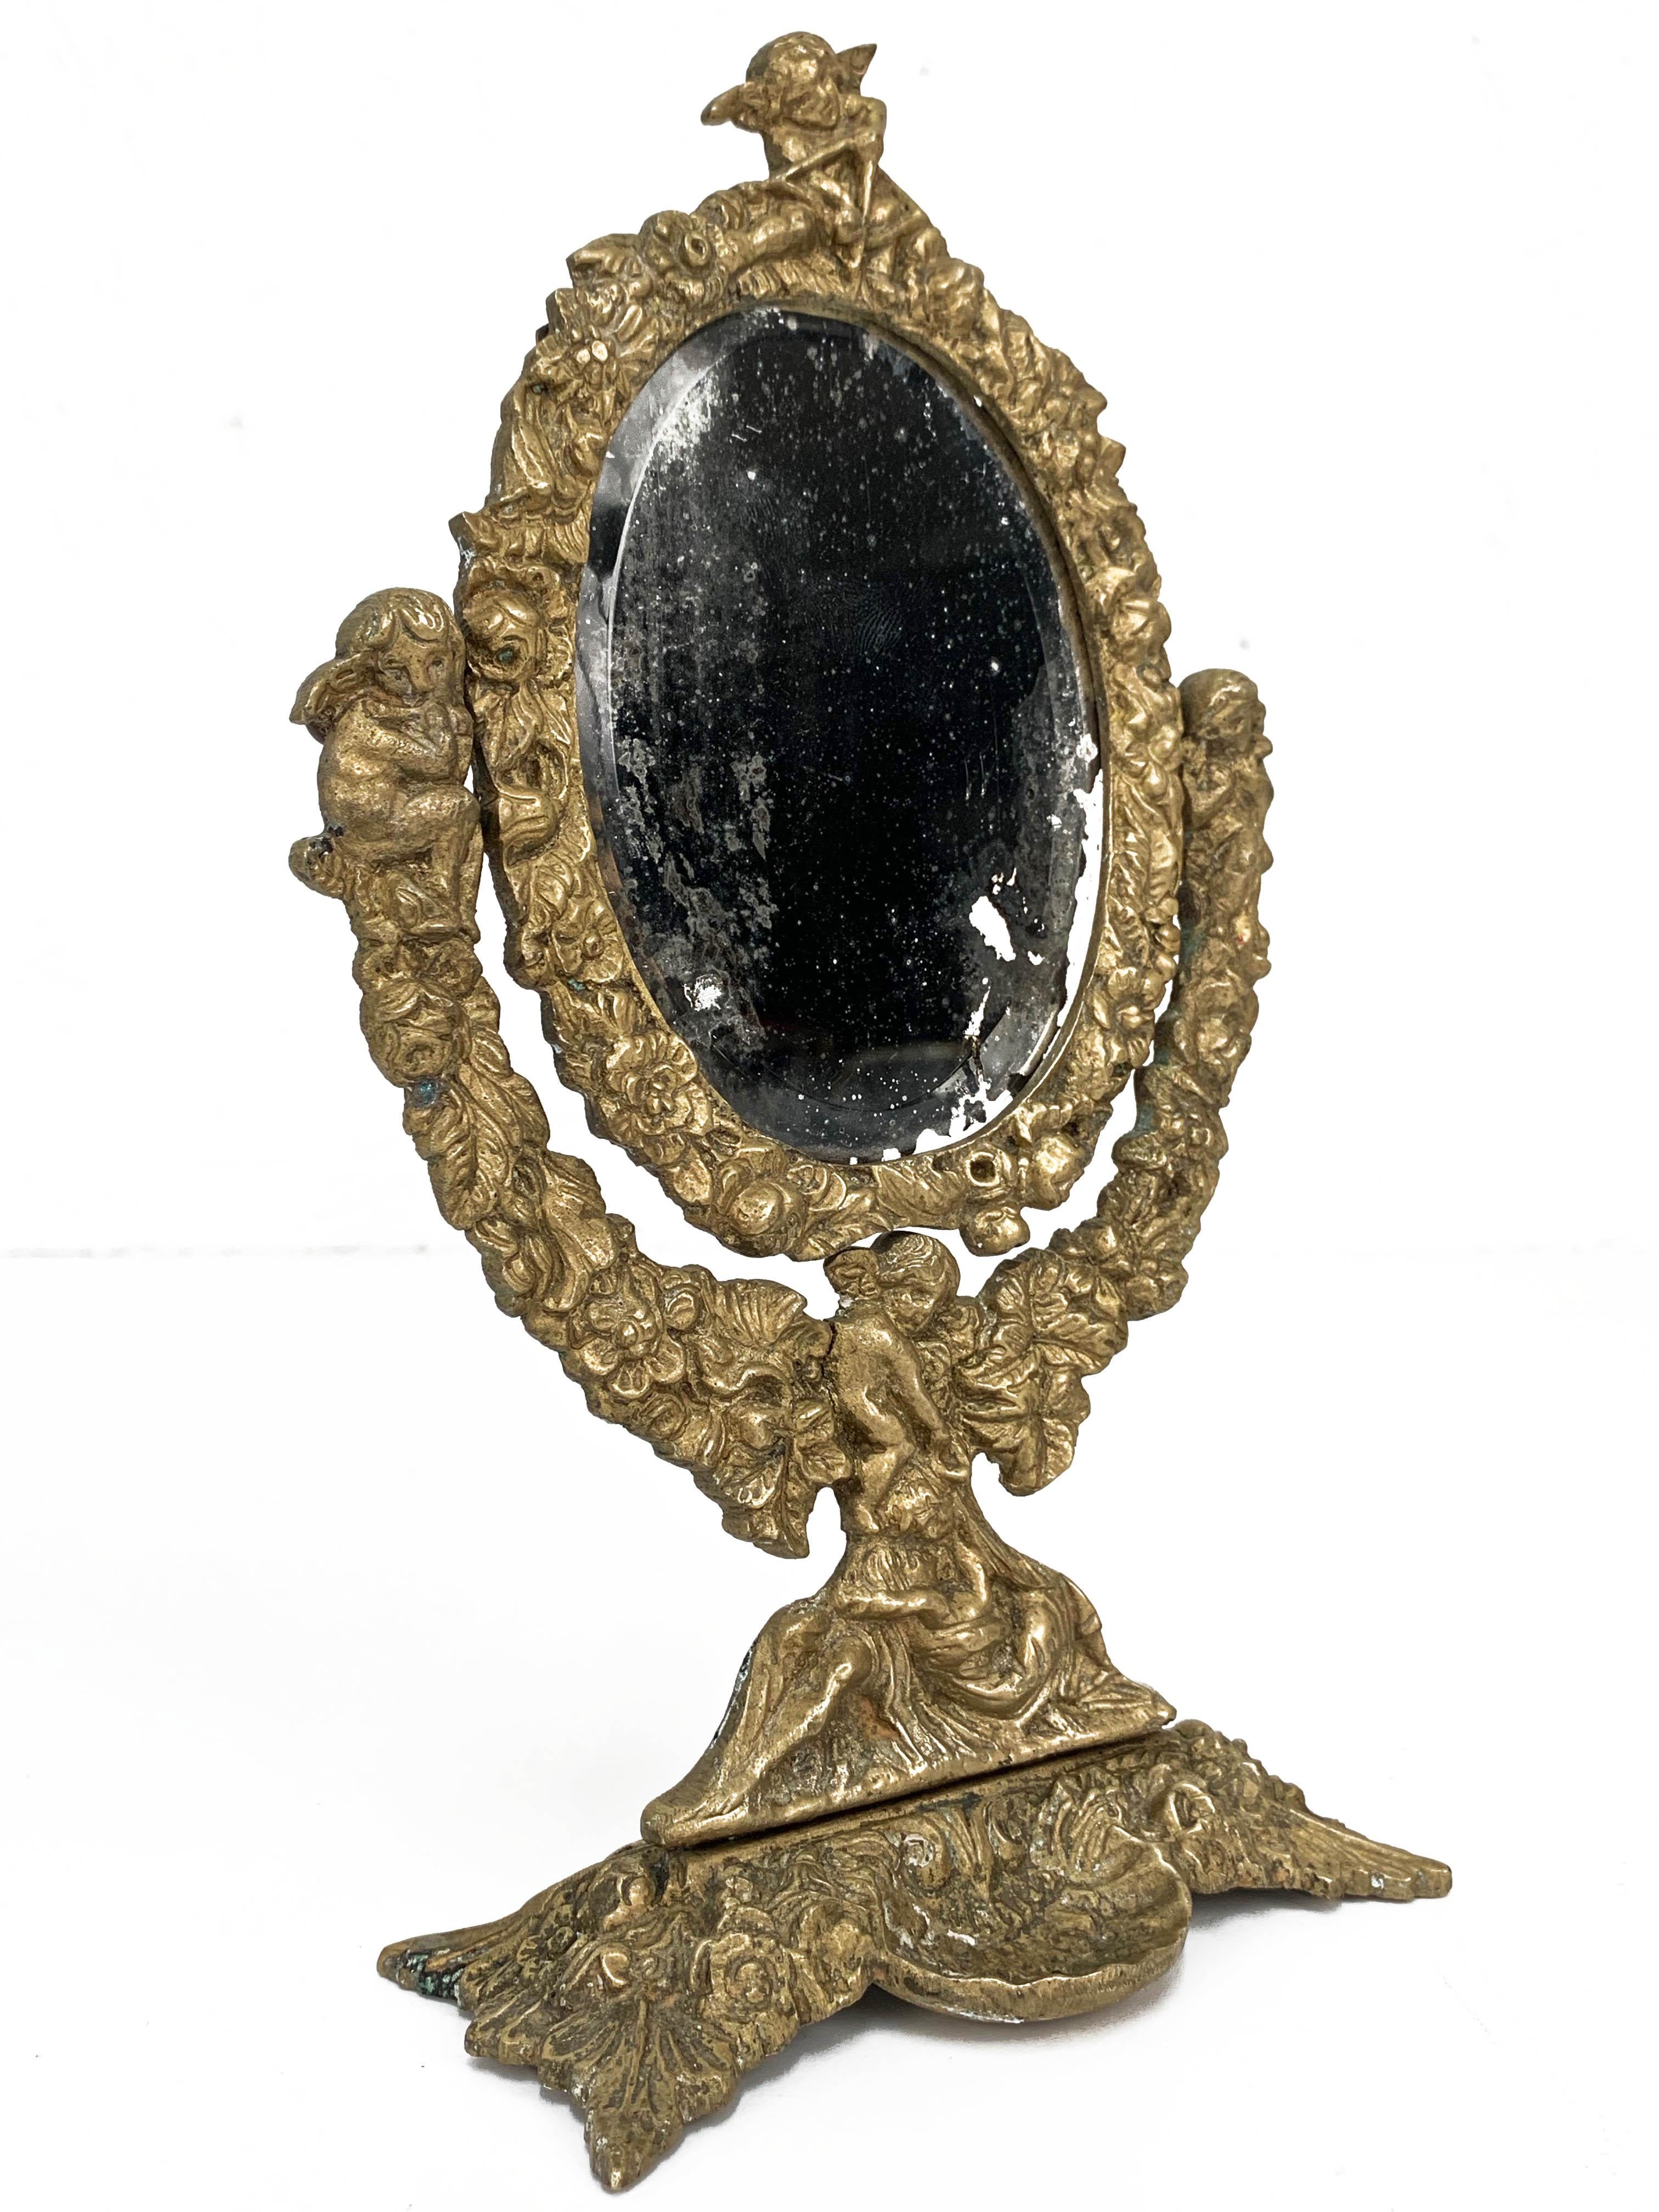 Amazing Italian Mercury gilded table mirror produced during the 20th century in Italy. 

This unique piece is a an art masterpiece with two main elements:
- a wonderful two pieces adjustable mirror;
- a lost-wax casting bronze sculpture